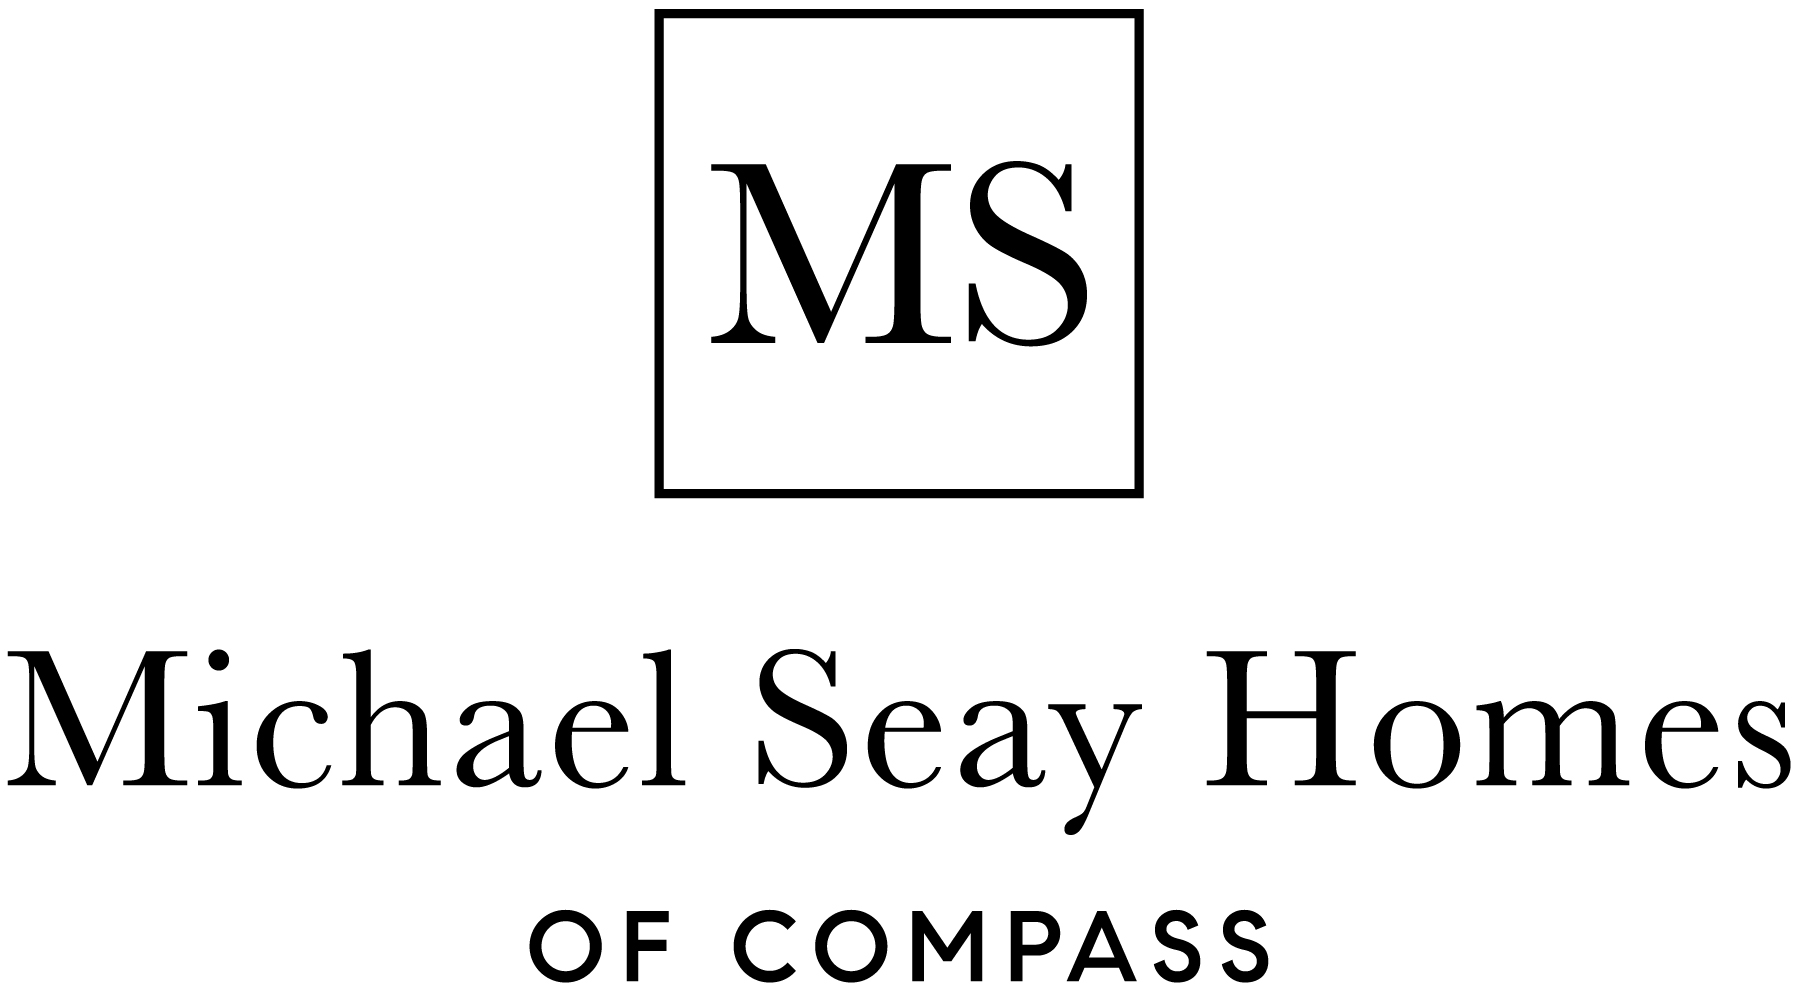 A text banner for Michael Seay Homes